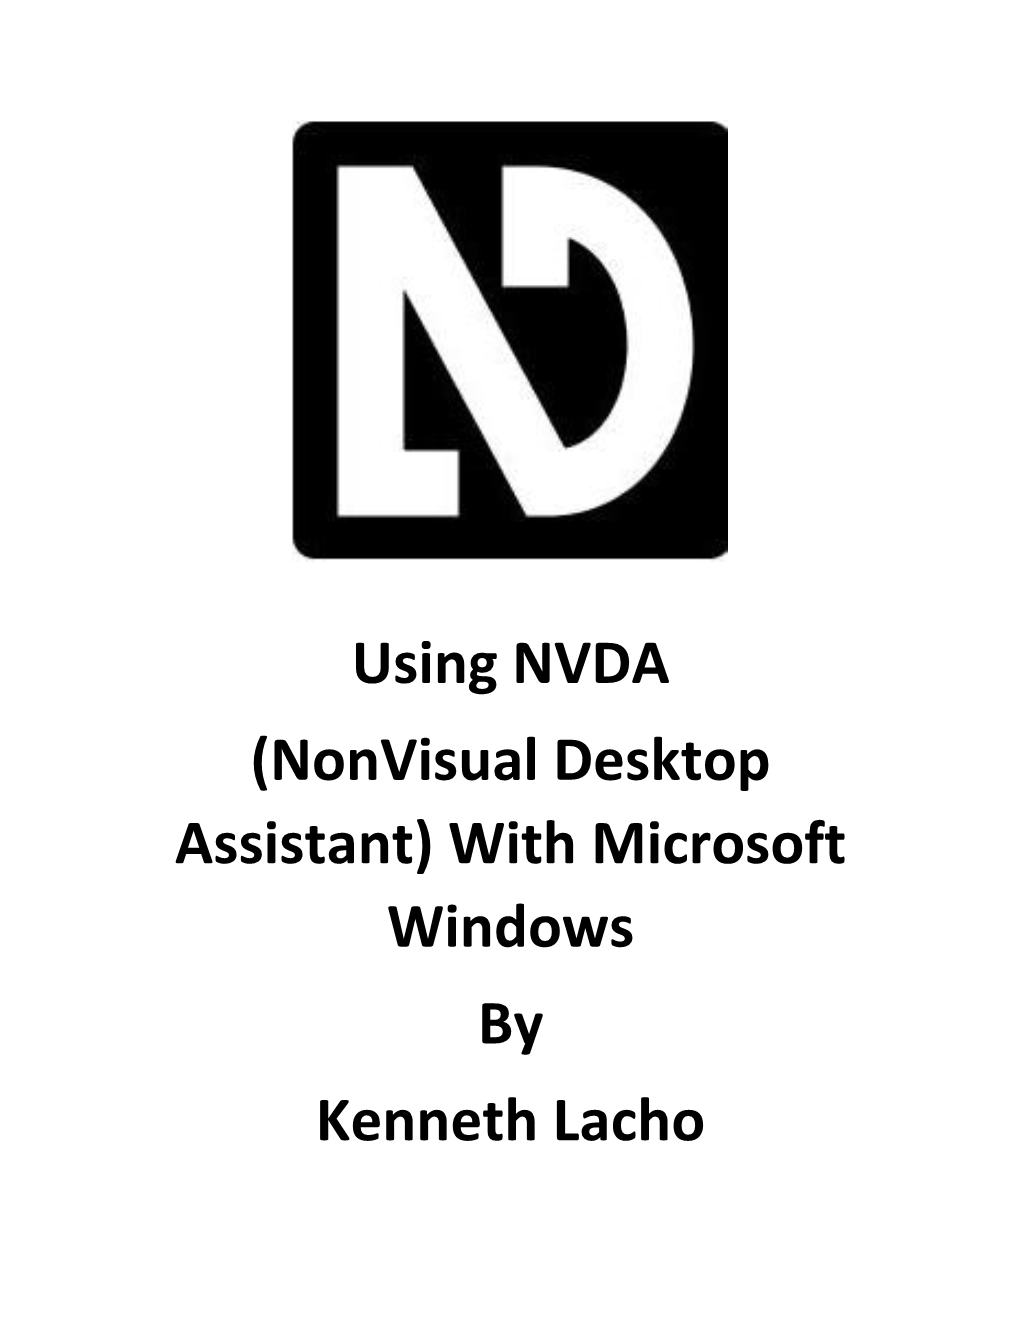 Using NVDA (Nonvisual Desktop Assistant) with Microsoft Windows by Kenneth Lacho